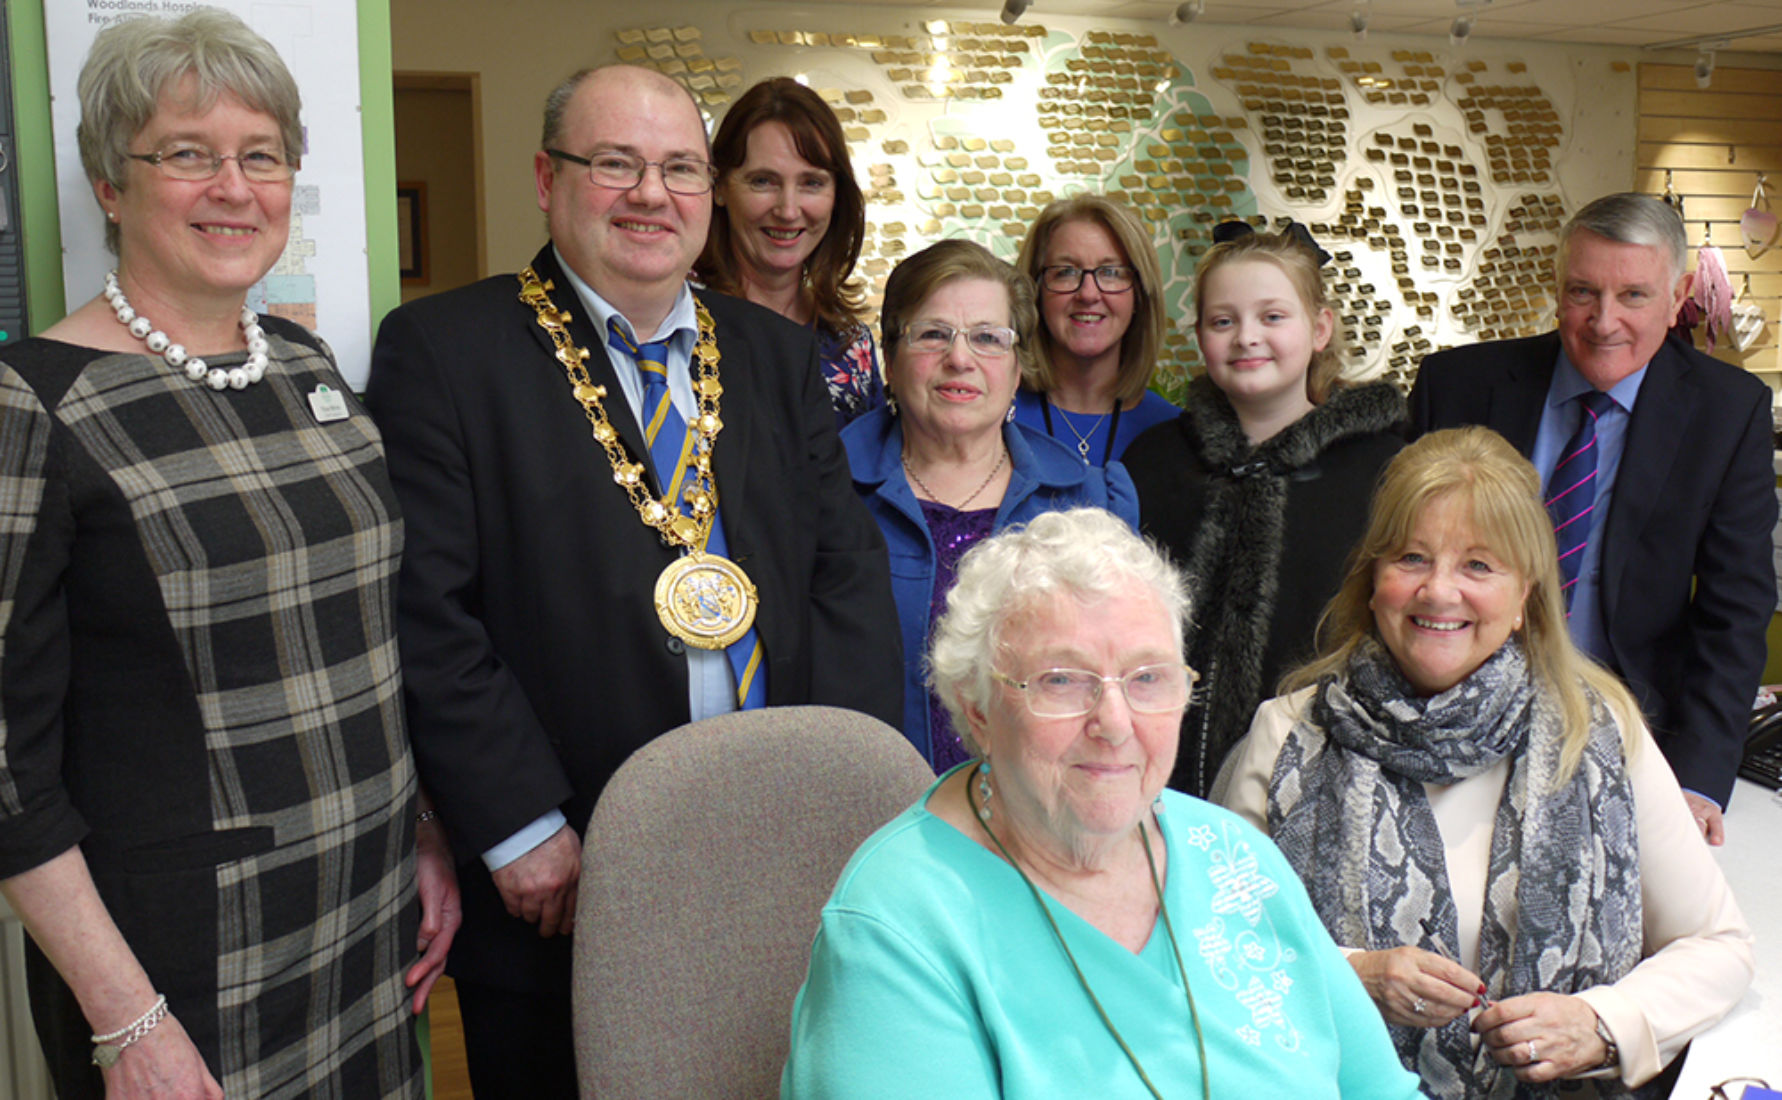 Mayor of Knowsley Visits Woodlands Hospice